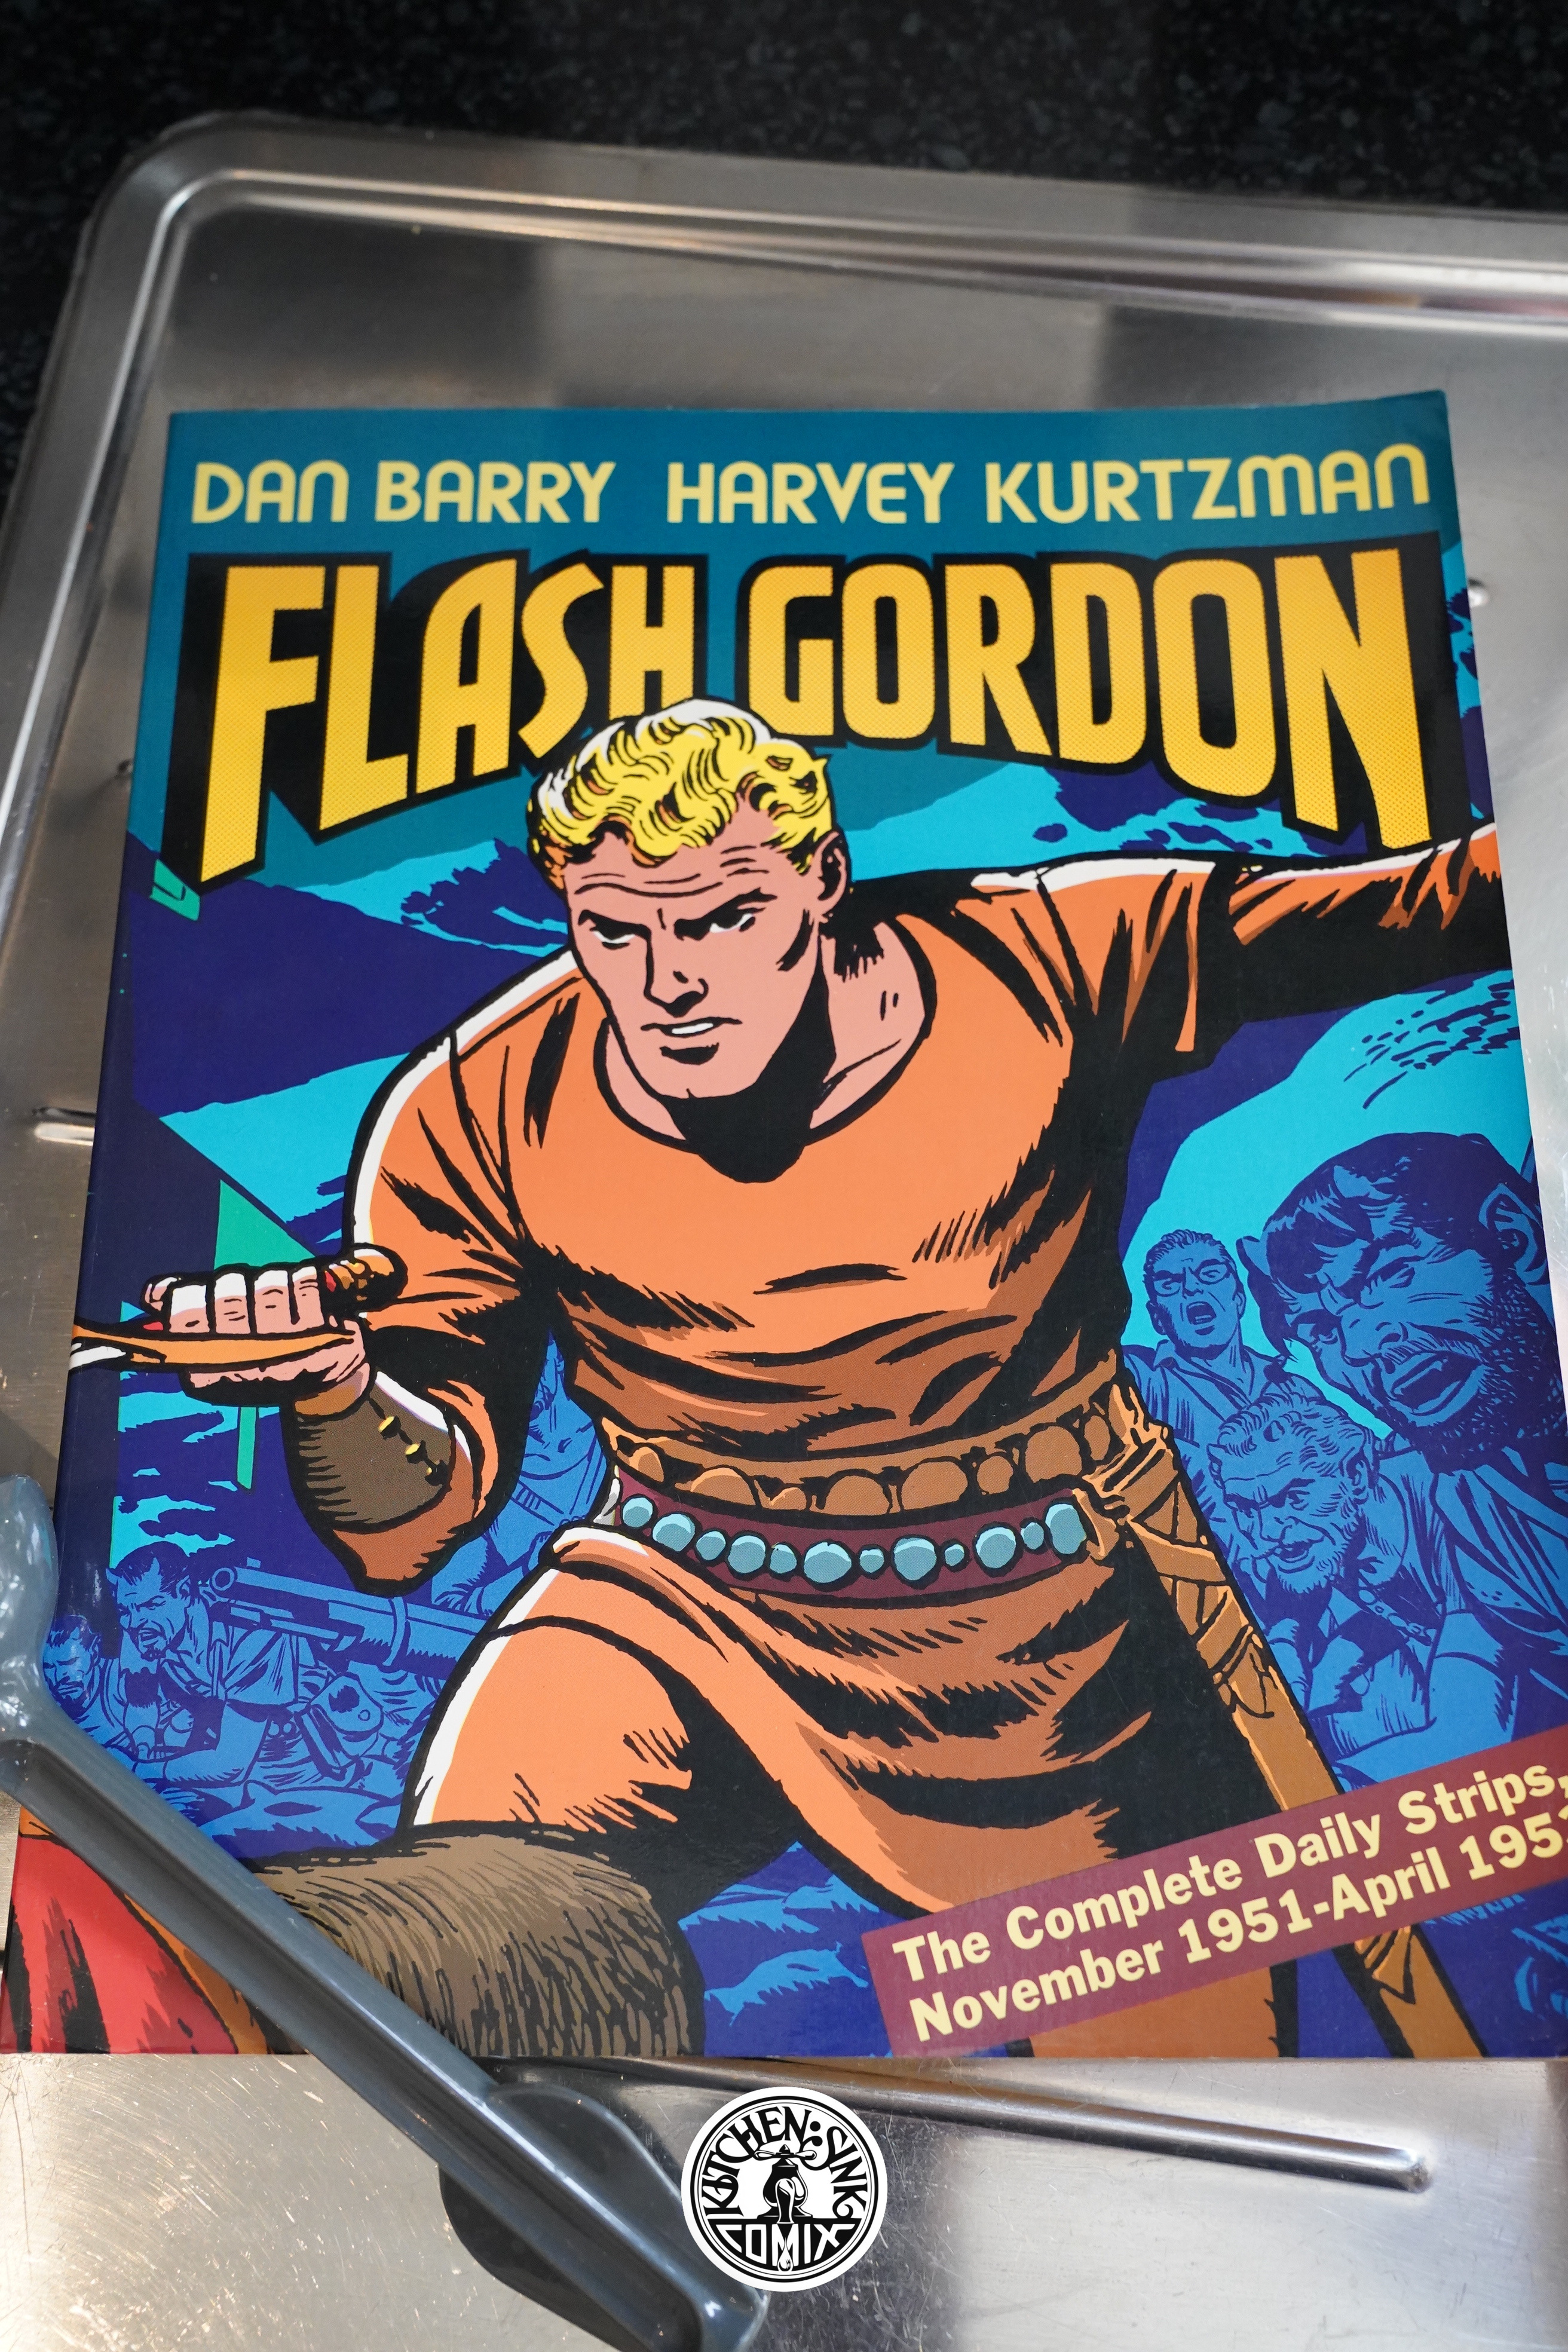 Flash Gordon was the King of the Impossible and the Ridiculous